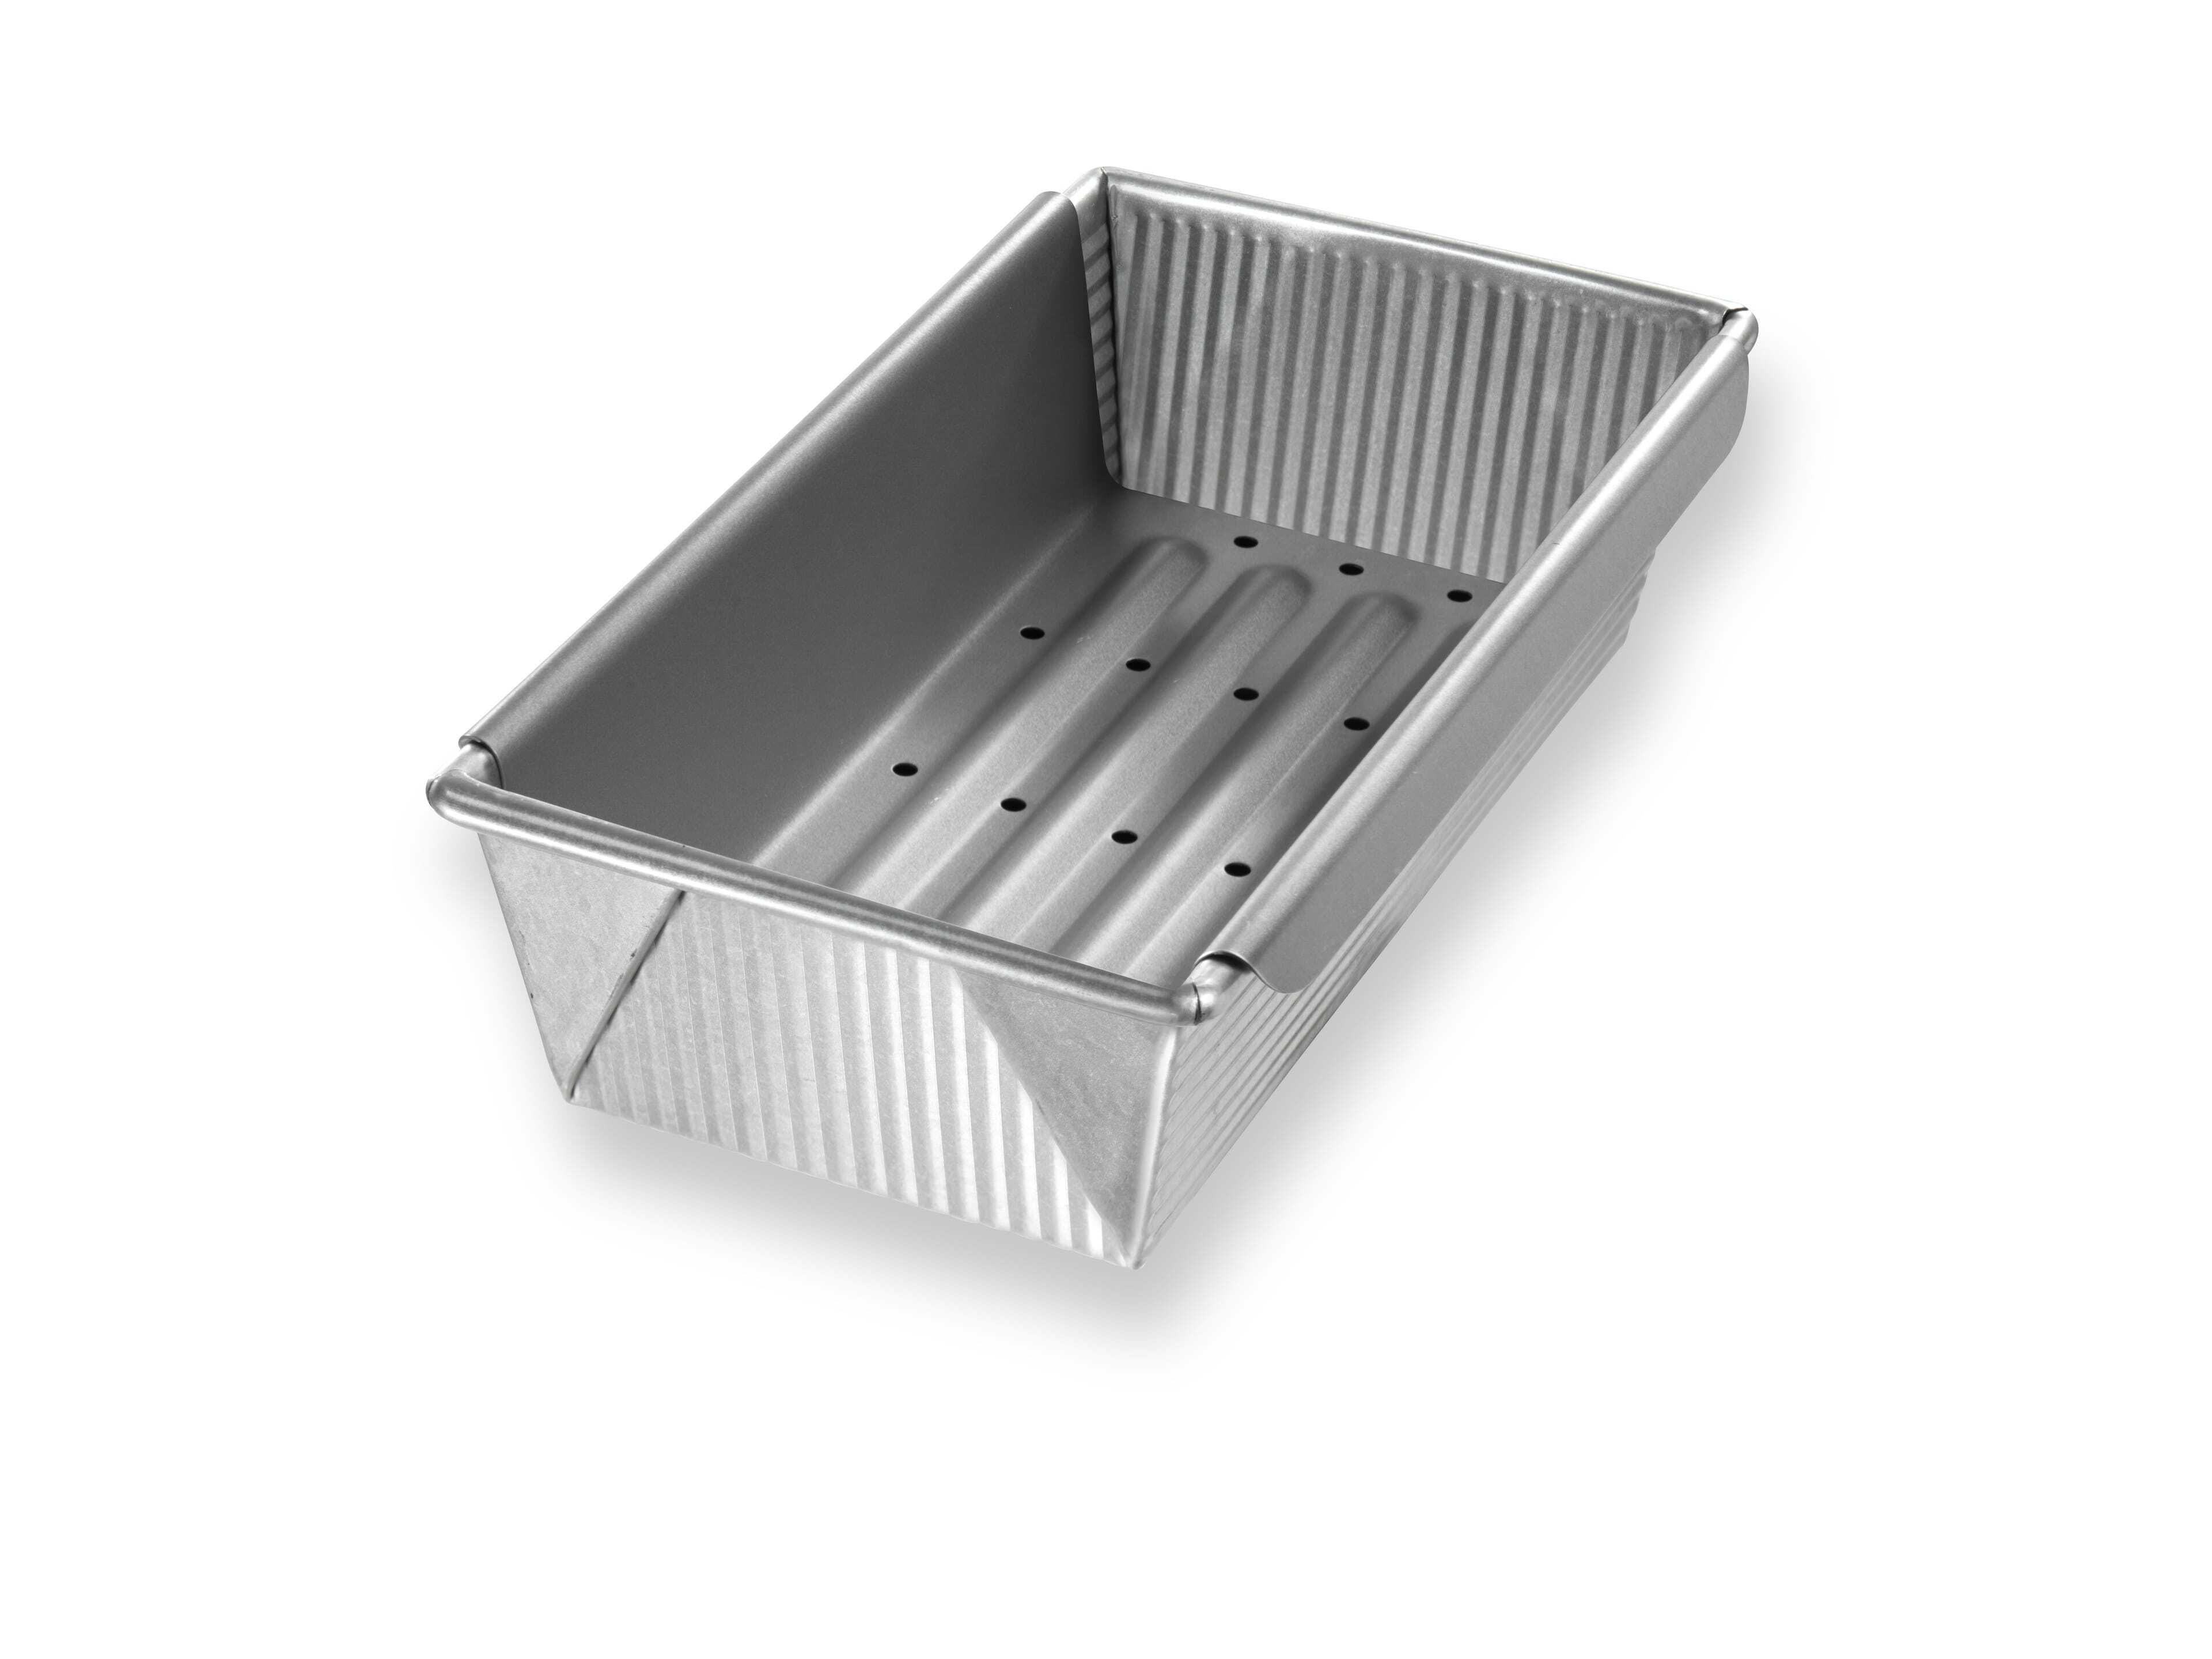  USA Pan Bakeware Pullman Loaf Pan with Cover, 13 x 4 inch,  Nonstick & Quick Release Coating, Made in the USA from Aluminized Steel: Loaf  Pans: Home & Kitchen